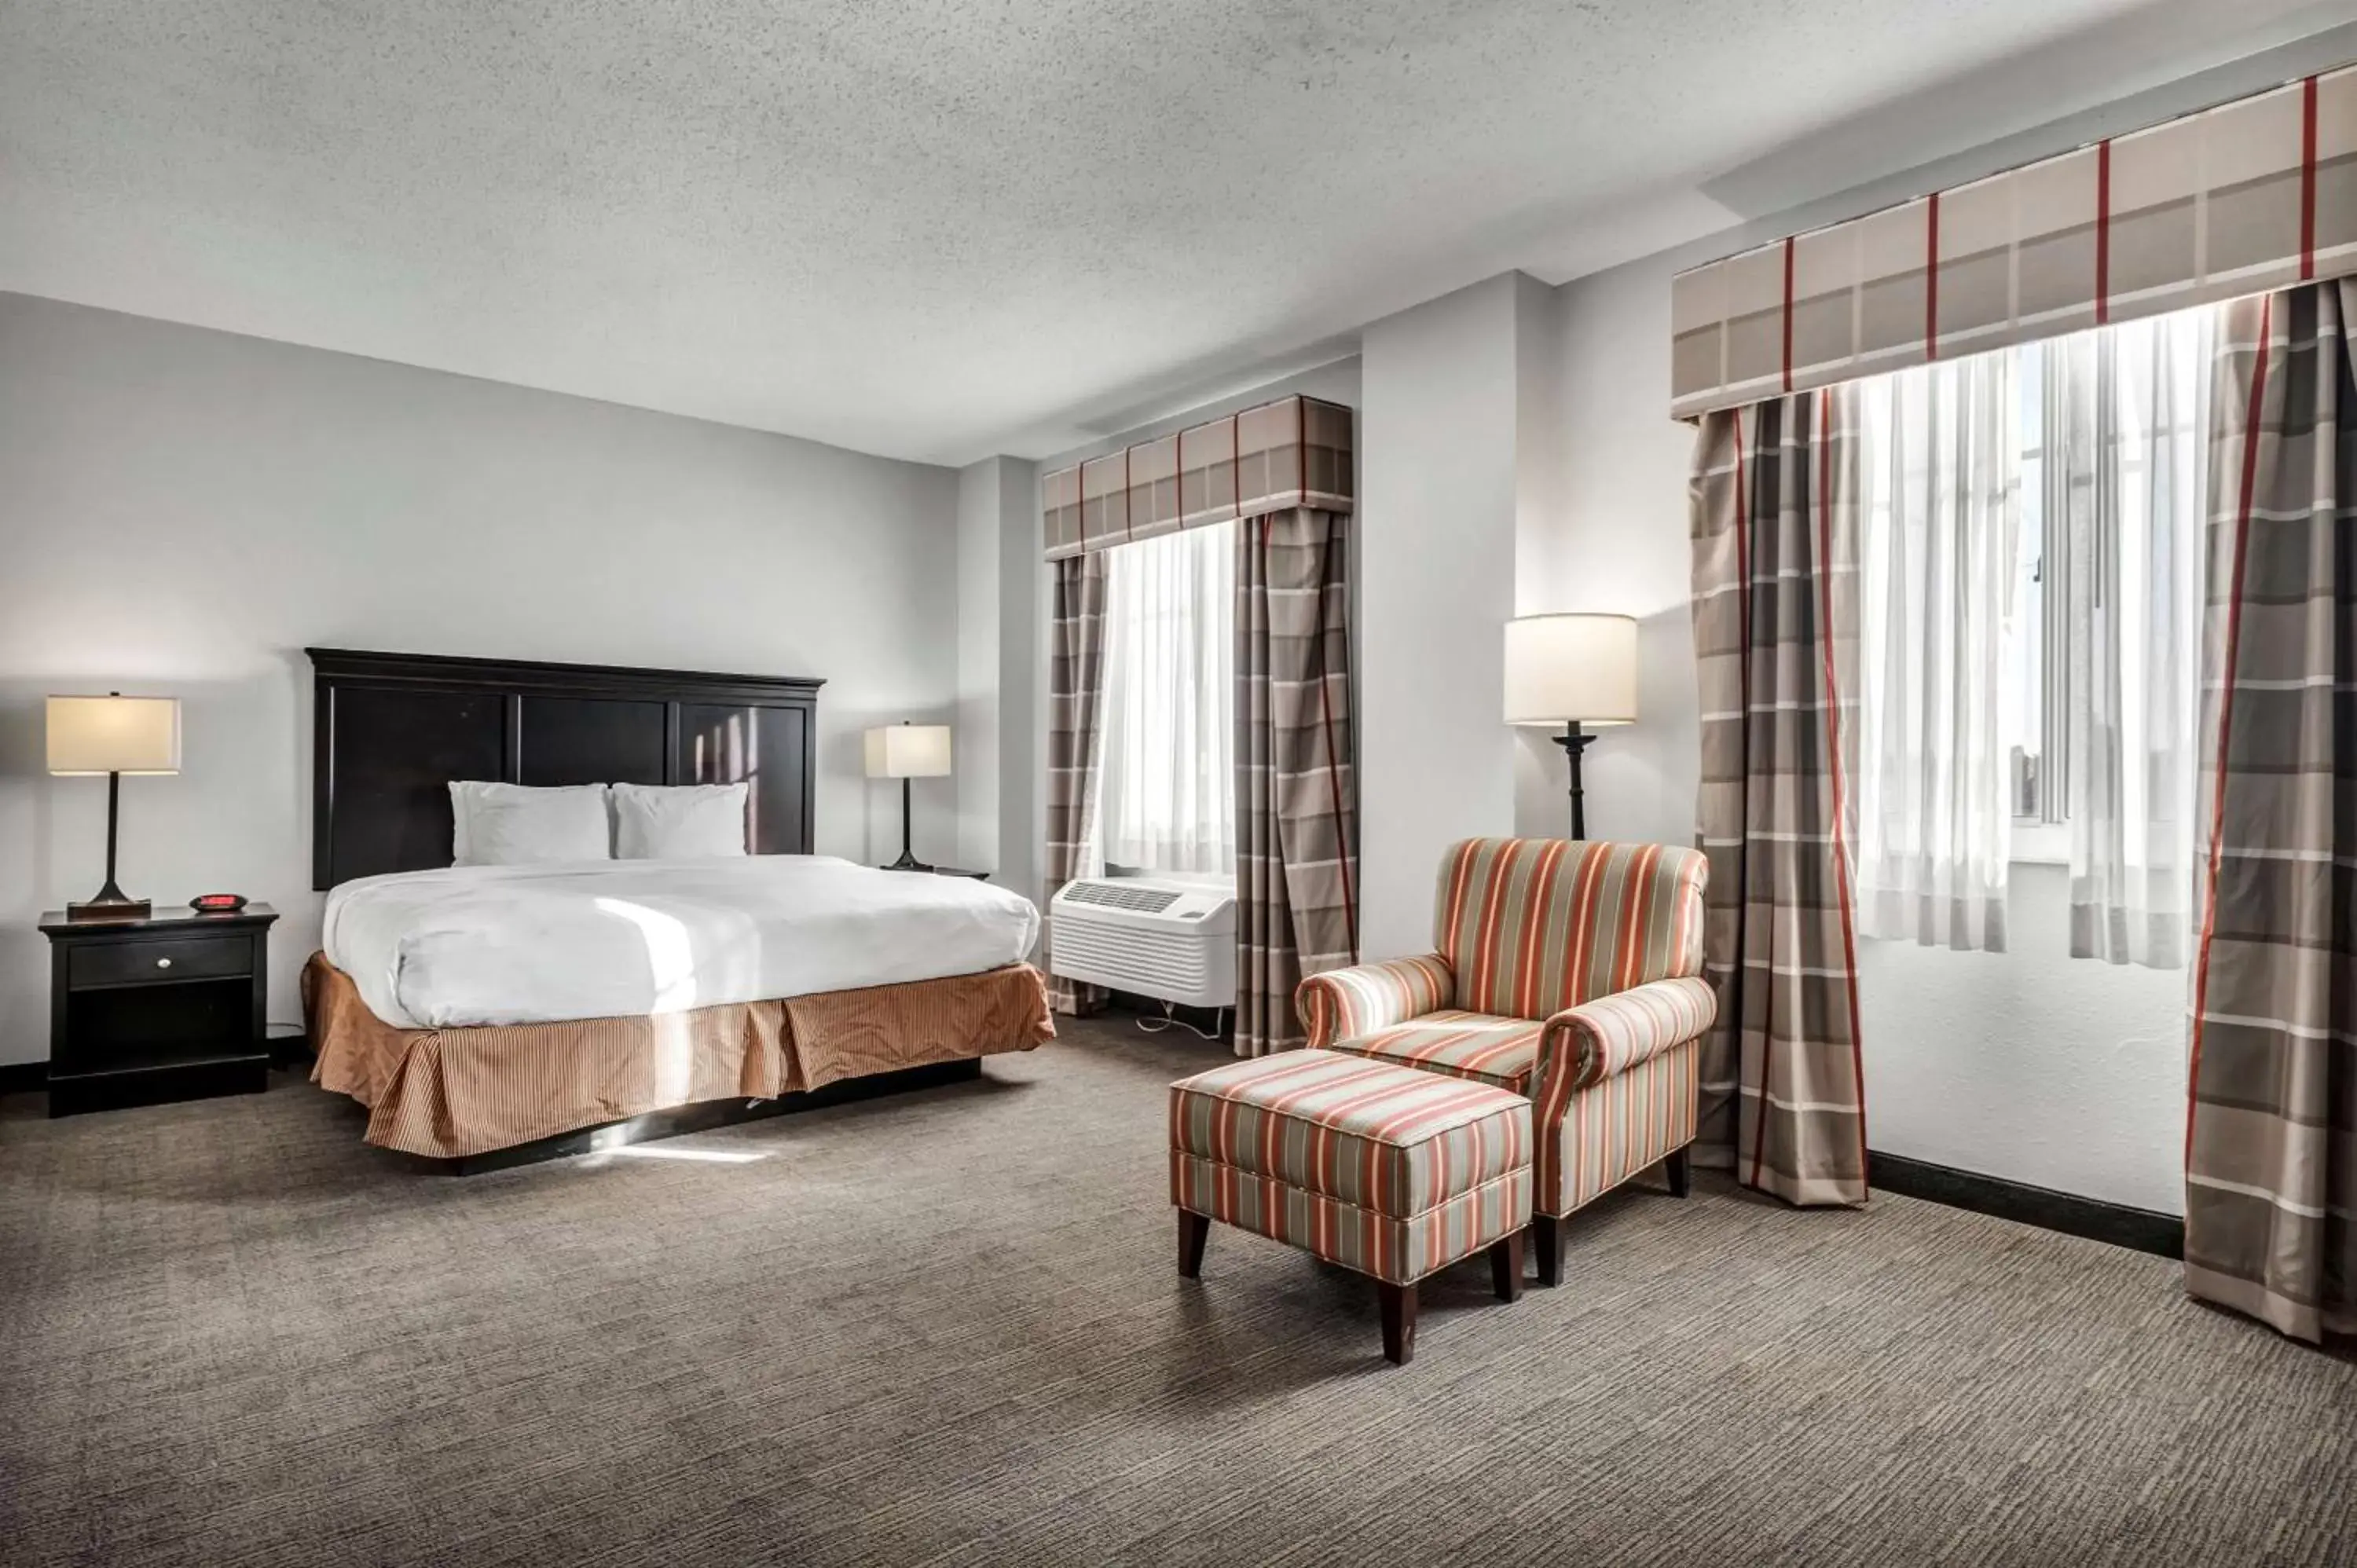 Bedroom in Country Inn & Suites by Radisson, Oklahoma City at Northwest Expressway, OK